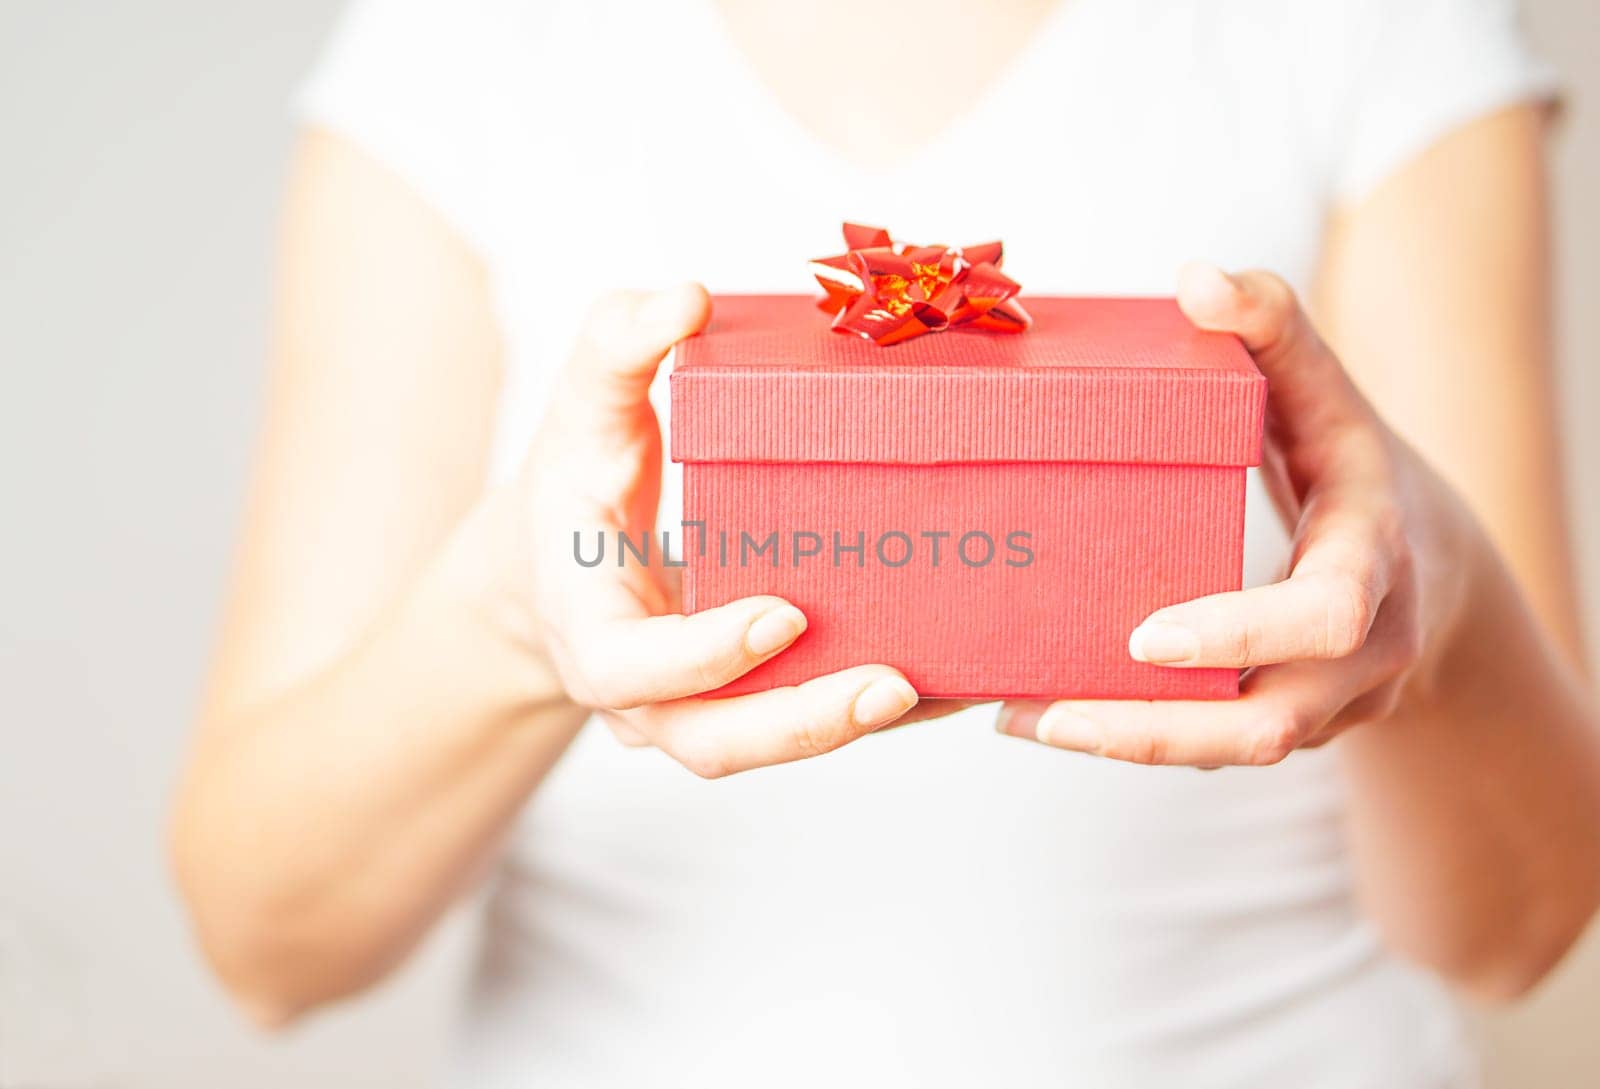 Female hands opening a small gift in a red box.